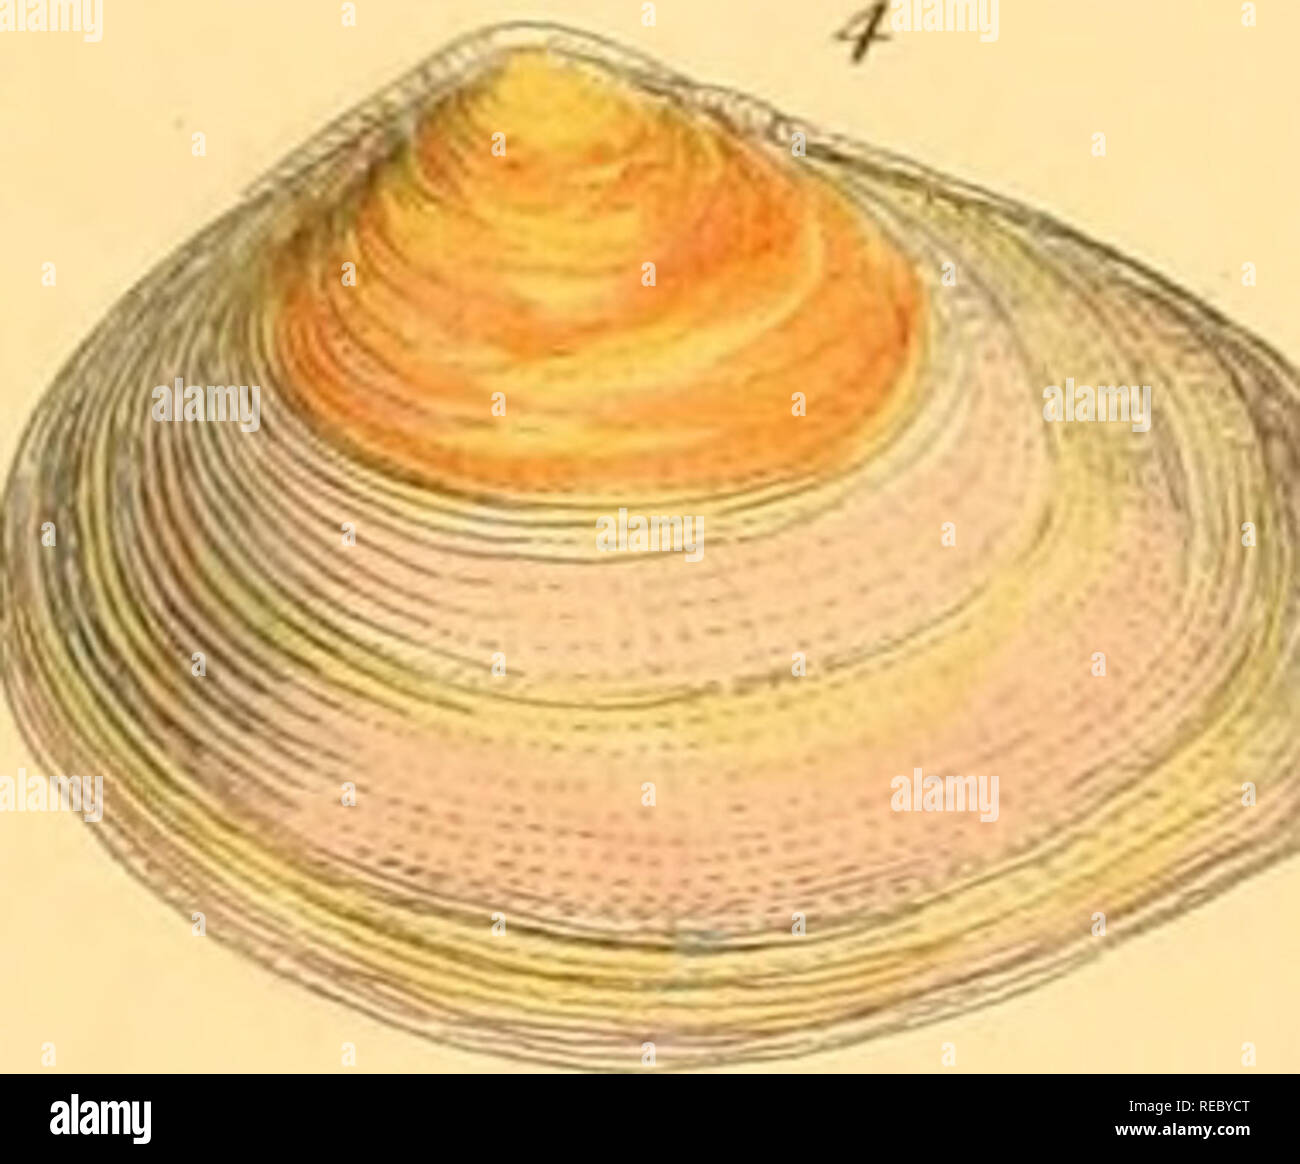 . Conchologia systematica, or Complete system of conchology: in which the Lepades and conchiferous Mollusca are described and classified according to their natural organization and habits. Shells; Mollusks. 18c 2. cetricola jrfioTadifitrmis 3. Dactylus, â /. ochroleitca. 5. 7%tpesiris. O' . subglobosa. Please note that these images are extracted from scanned page images that may have been digitally enhanced for readability - coloration and appearance of these illustrations may not perfectly resemble the original work.. Reeve, Lovell, 1814-1865; Sowerby, G. B. (George Brettingham), 1812-1884, i Stock Photo